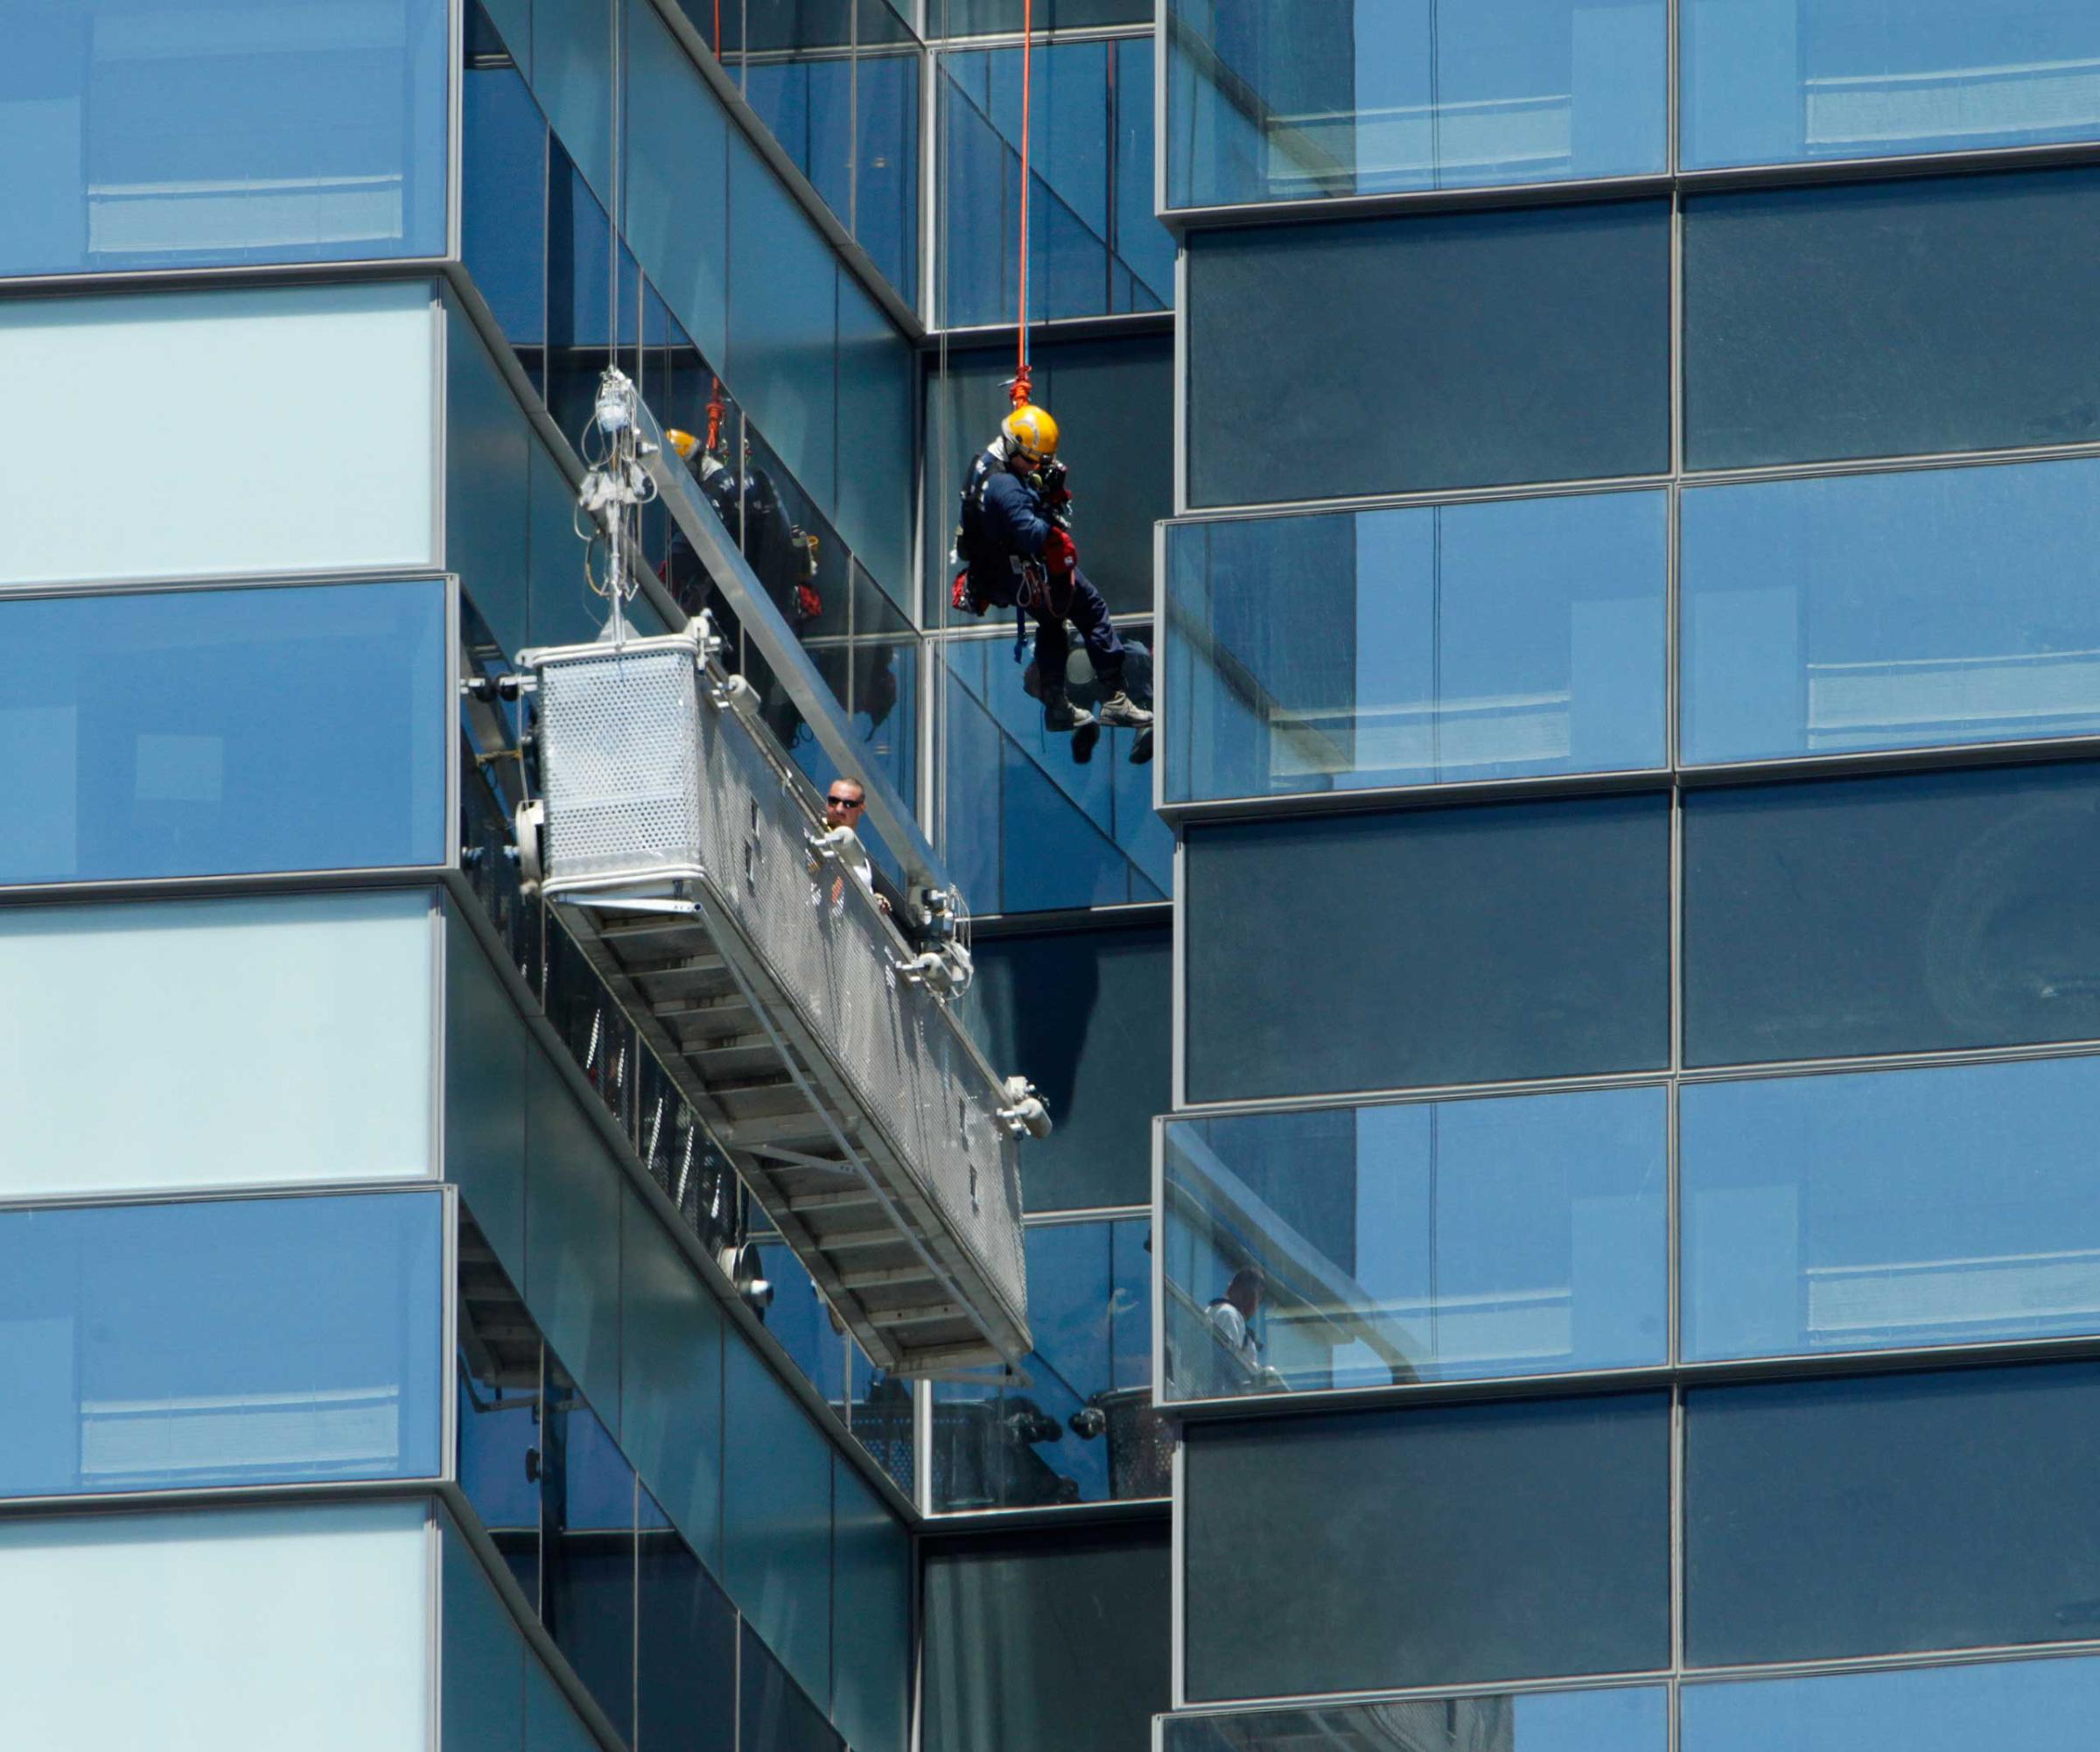 A Las Vegas Fire Department high-angle rescue worker lowers down to window washers who are stranded outside the 35th floor of the Vdara Hotel at CityCenter in Las Vegas on July 25, 2012.